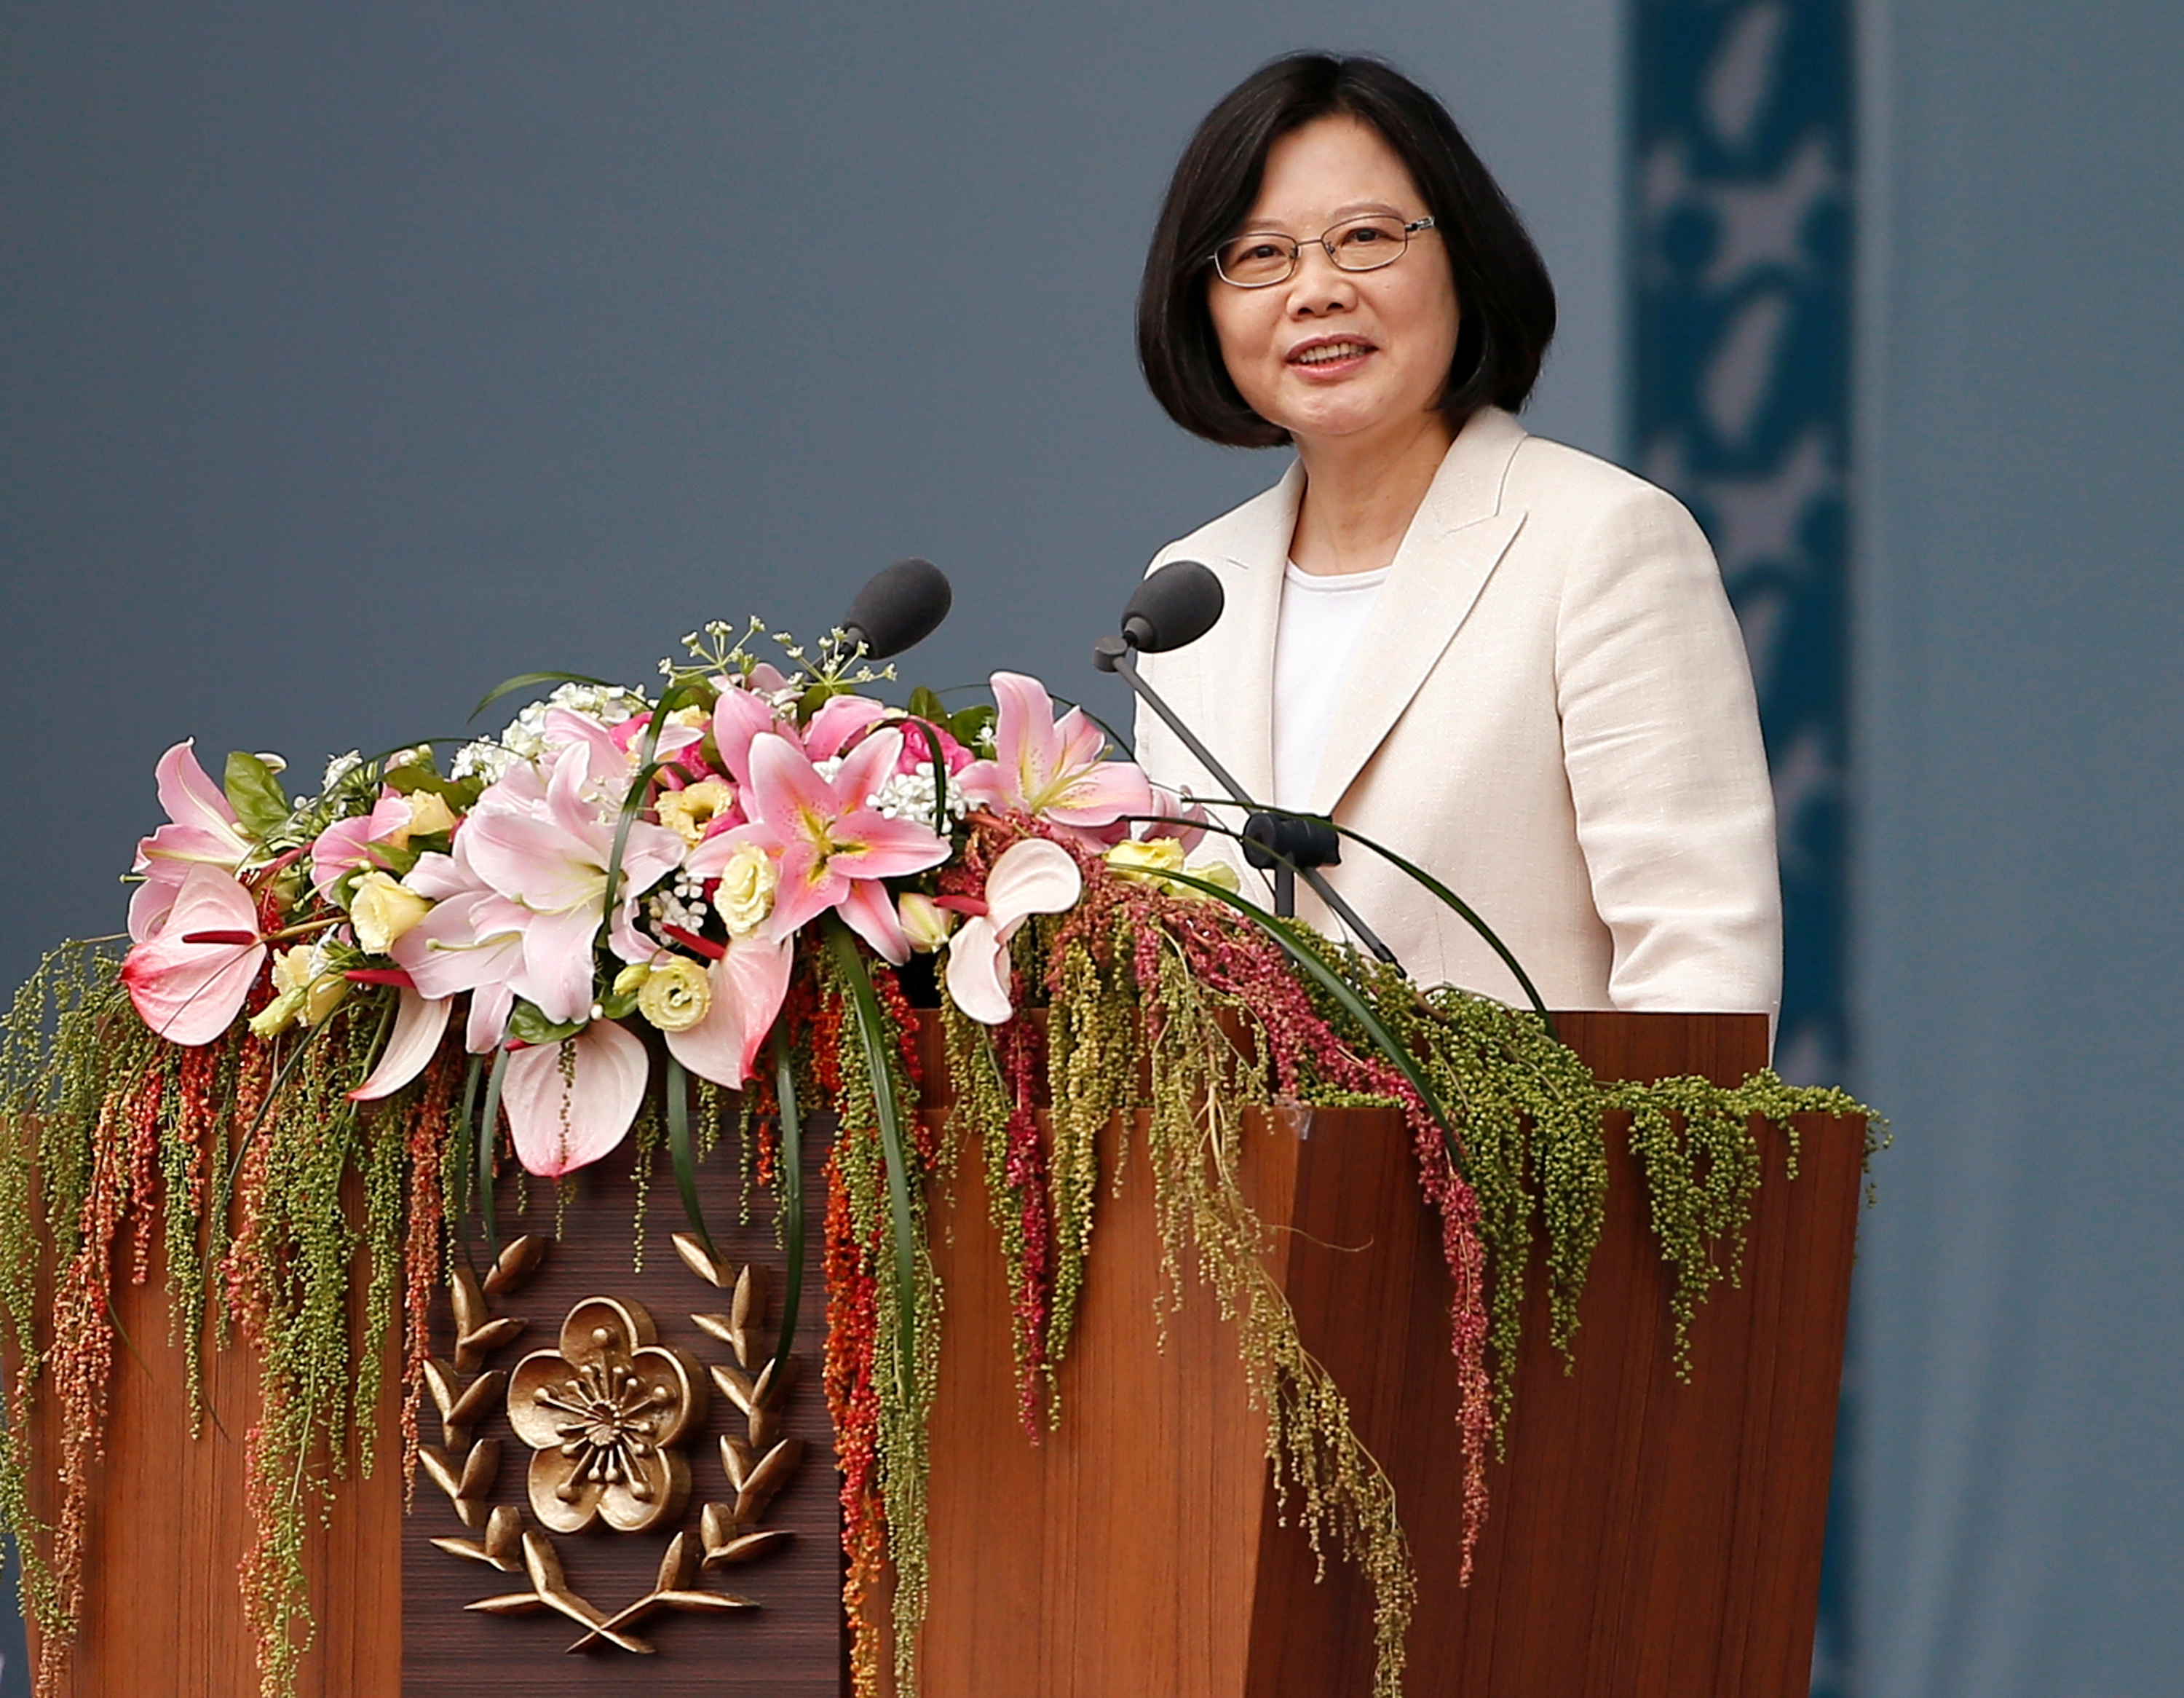 Taiwan's President Tsai Ing-wen gives a speech during her inauguration ceremony in Taipei on May 20, 2016 (Tyrone Siu—Reuters)